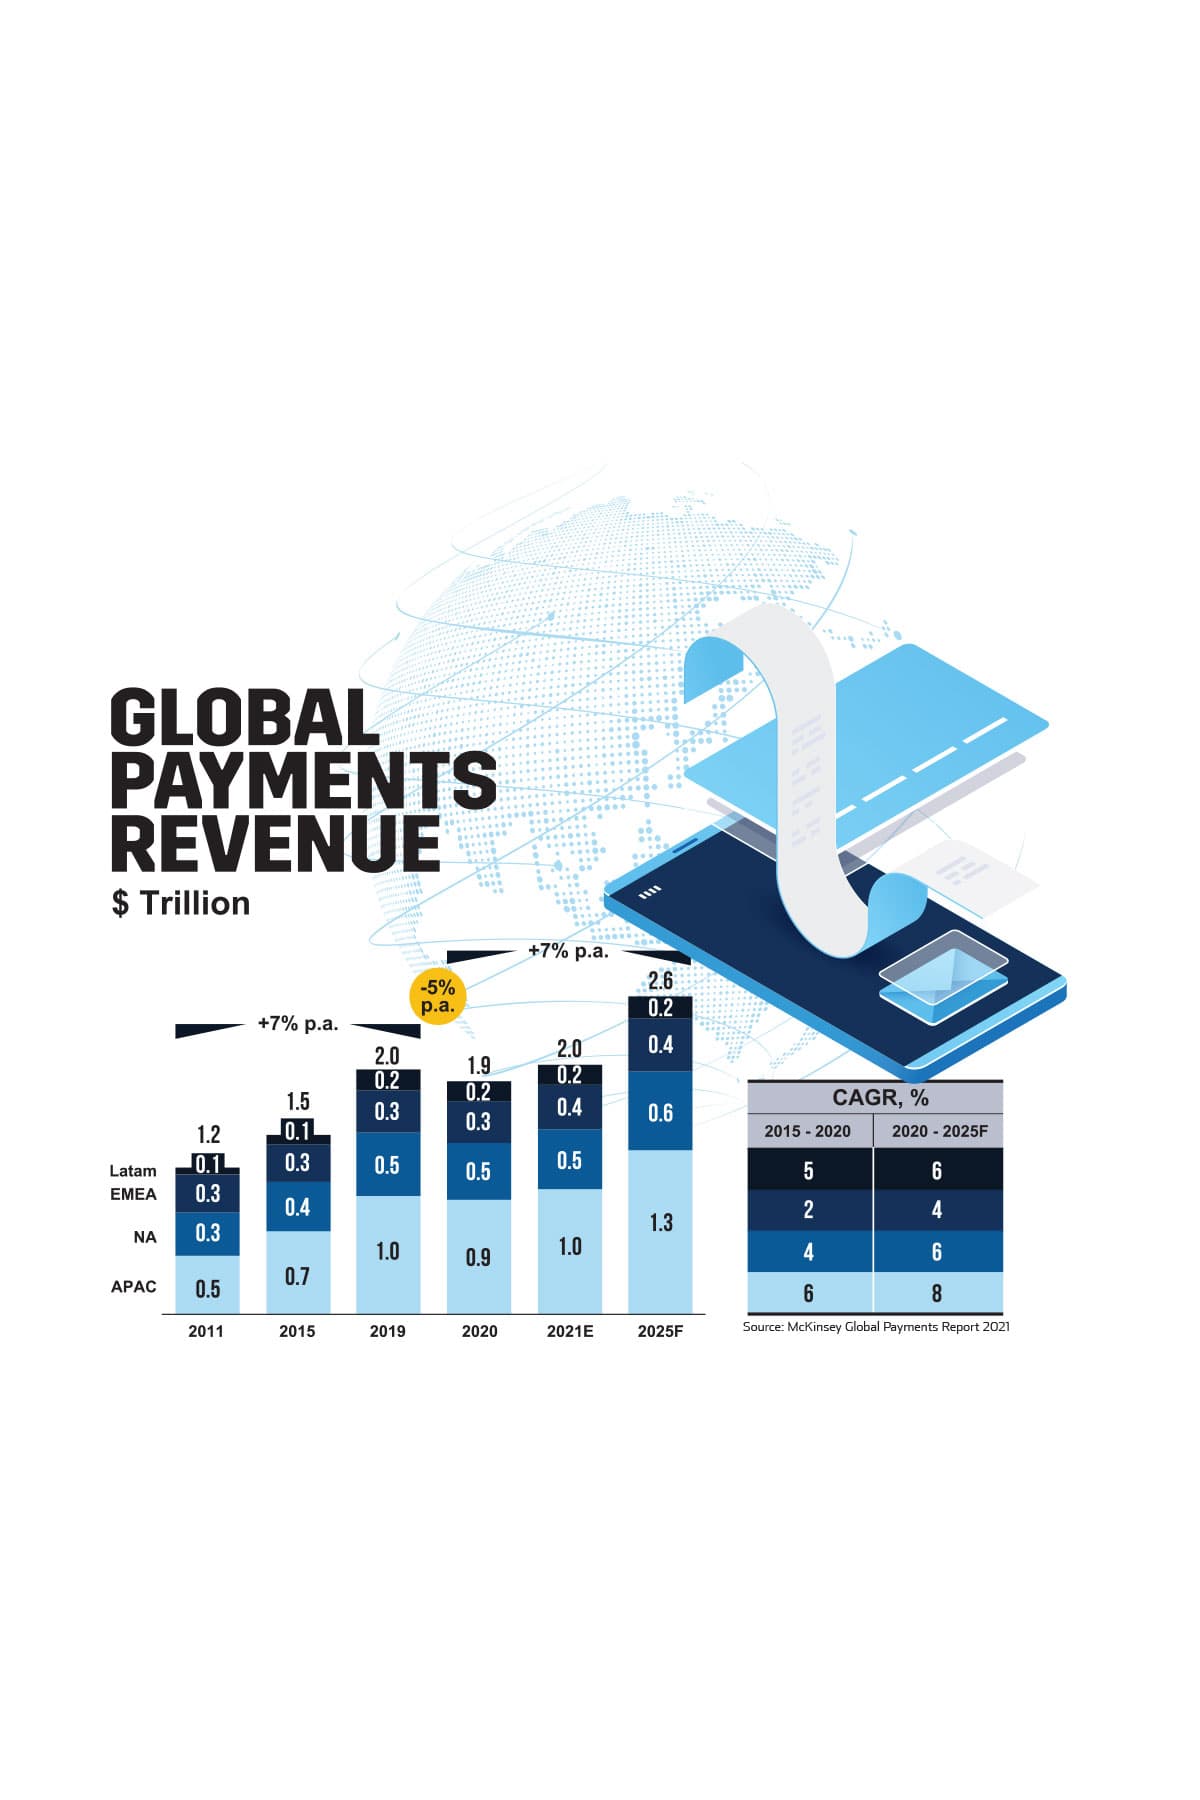 Global payments revenue